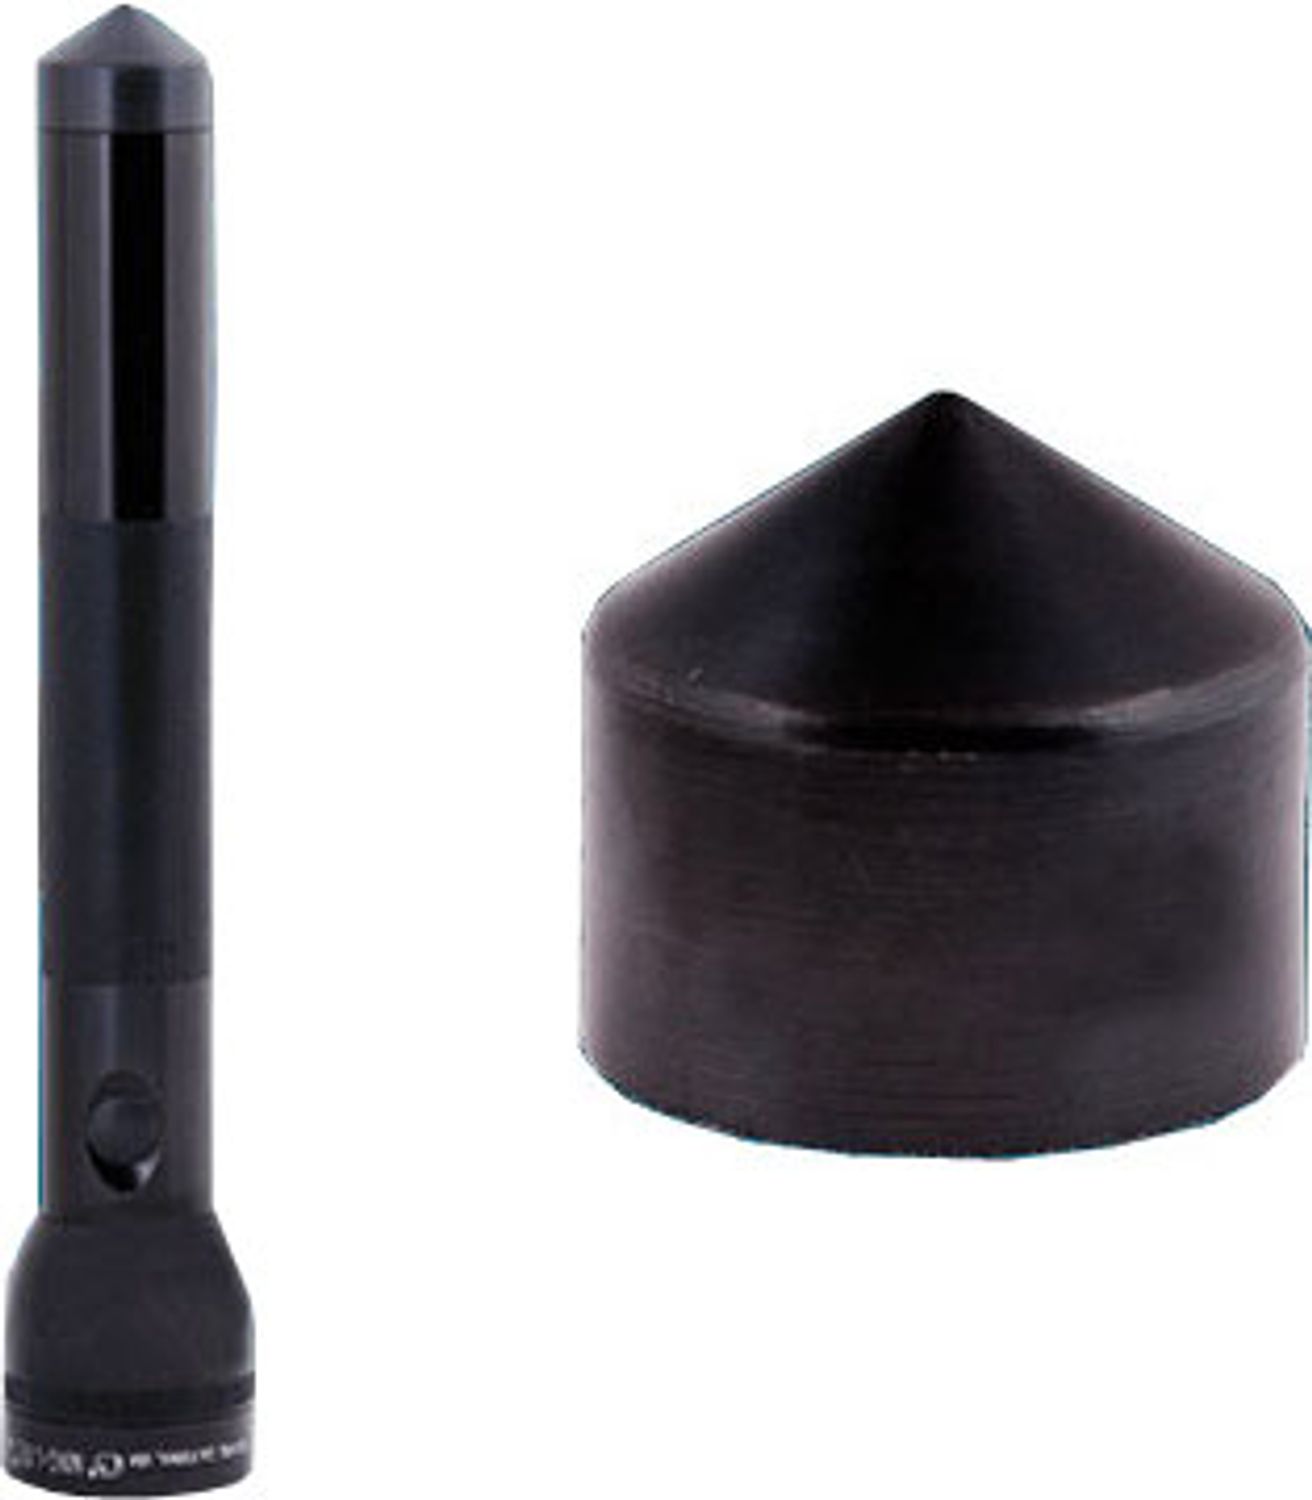 Details about   Metal Glass Breaker Cap Attachment for Maglite D-Cell Incandescent Flashlight 